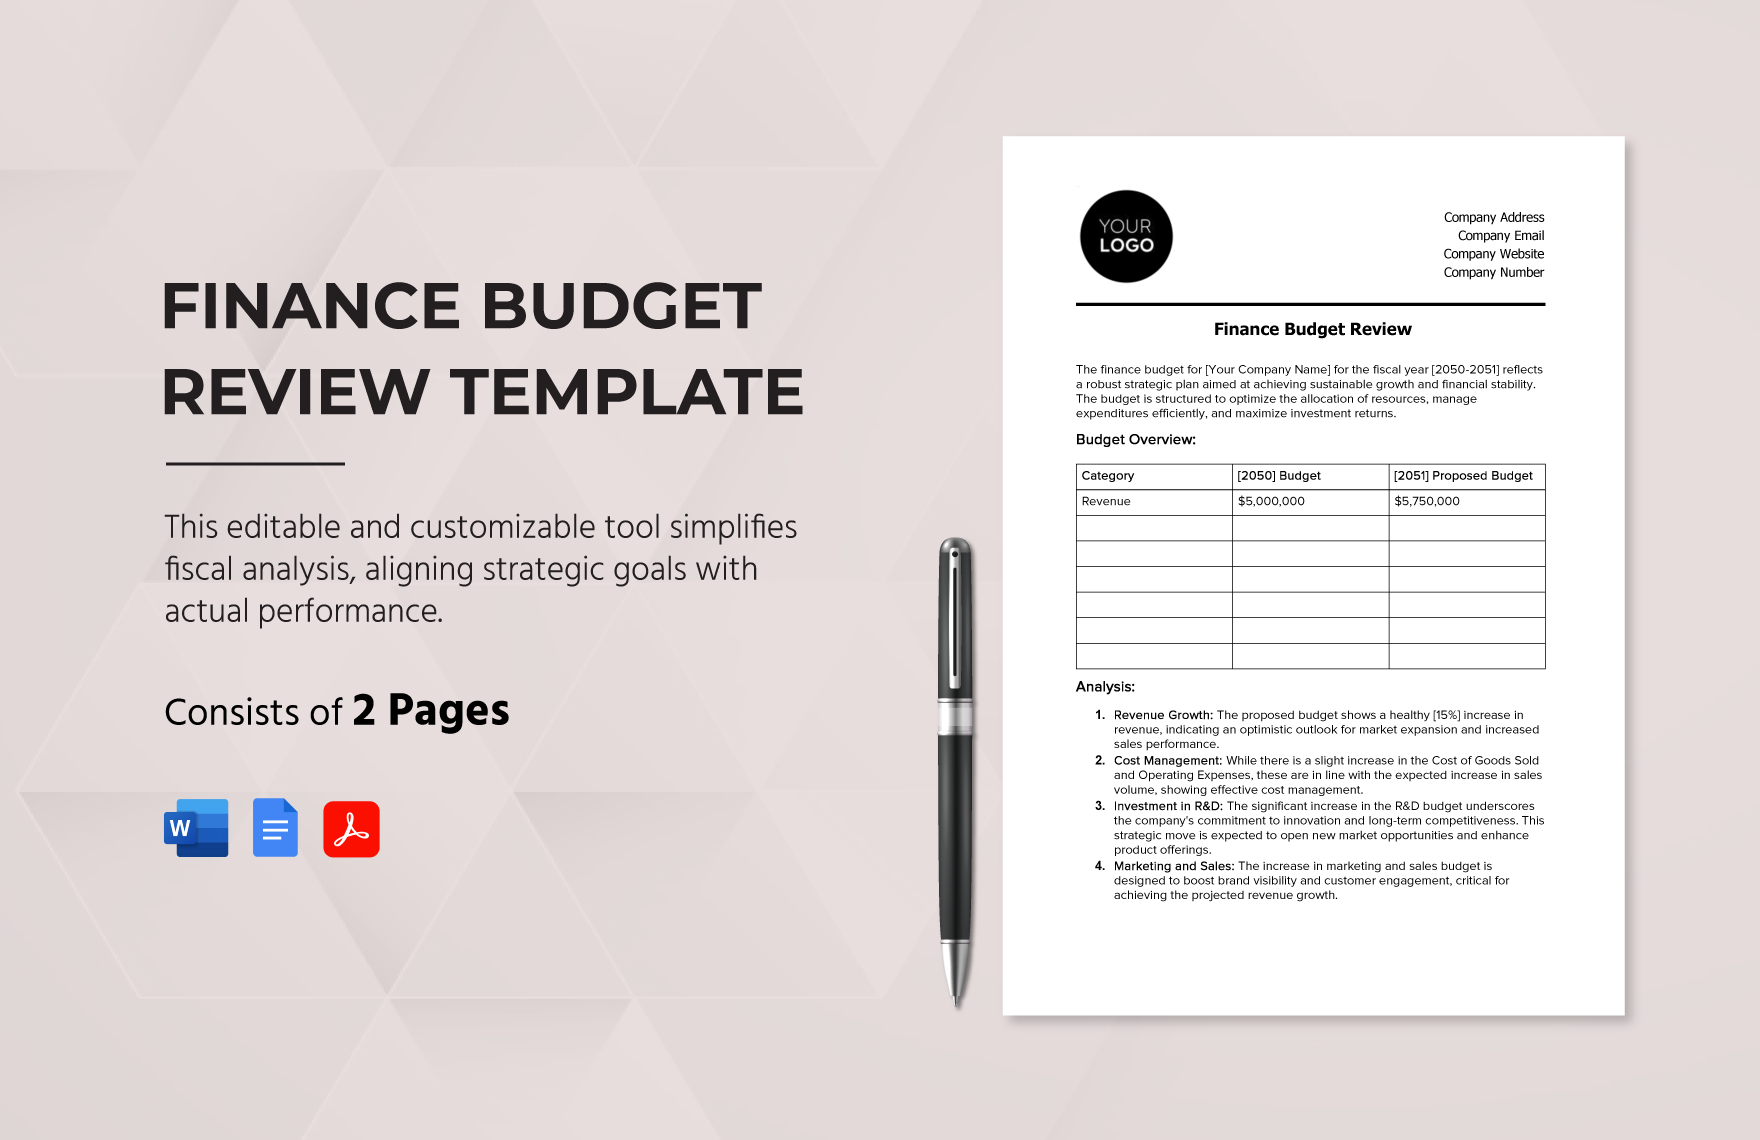 Finance Budget Review Template